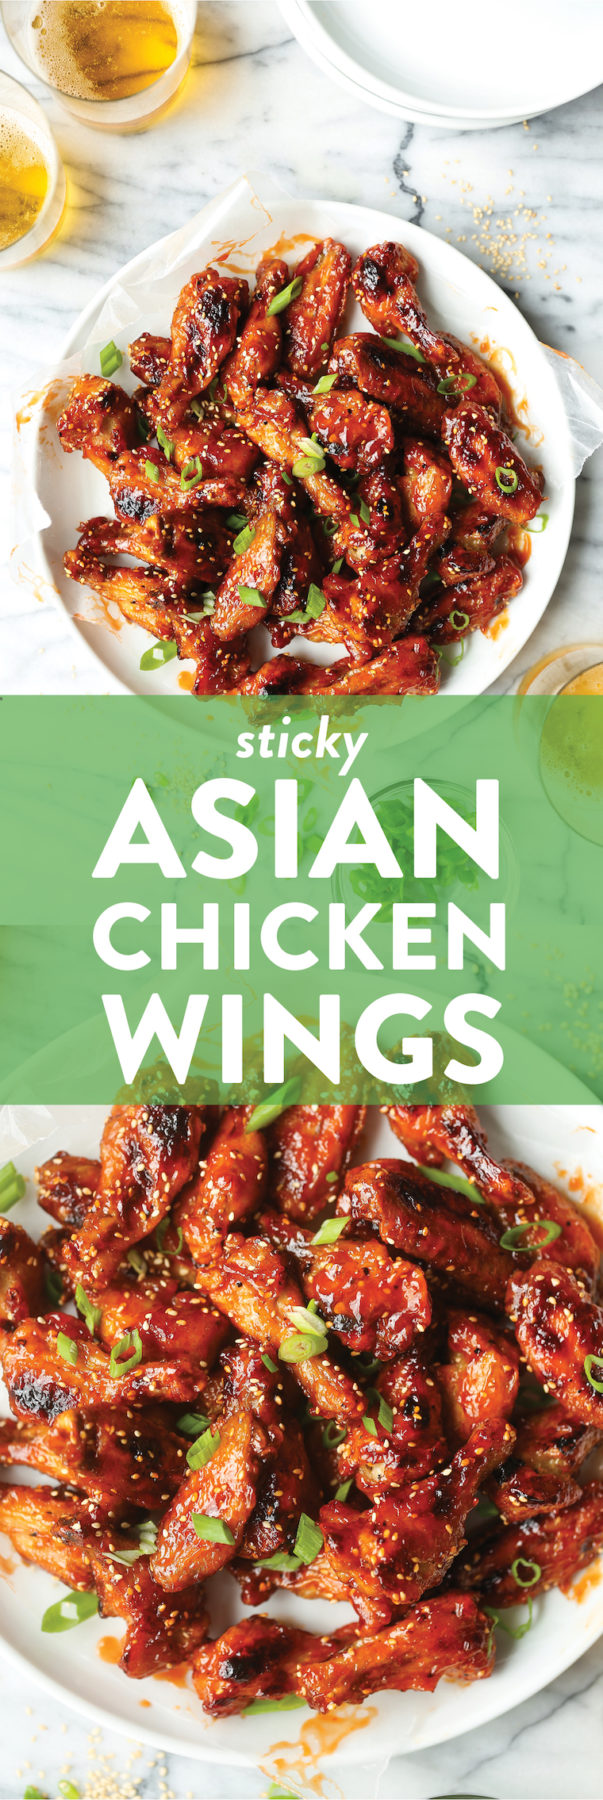 Sticky Asian Chicken Wings - Damn Delicious